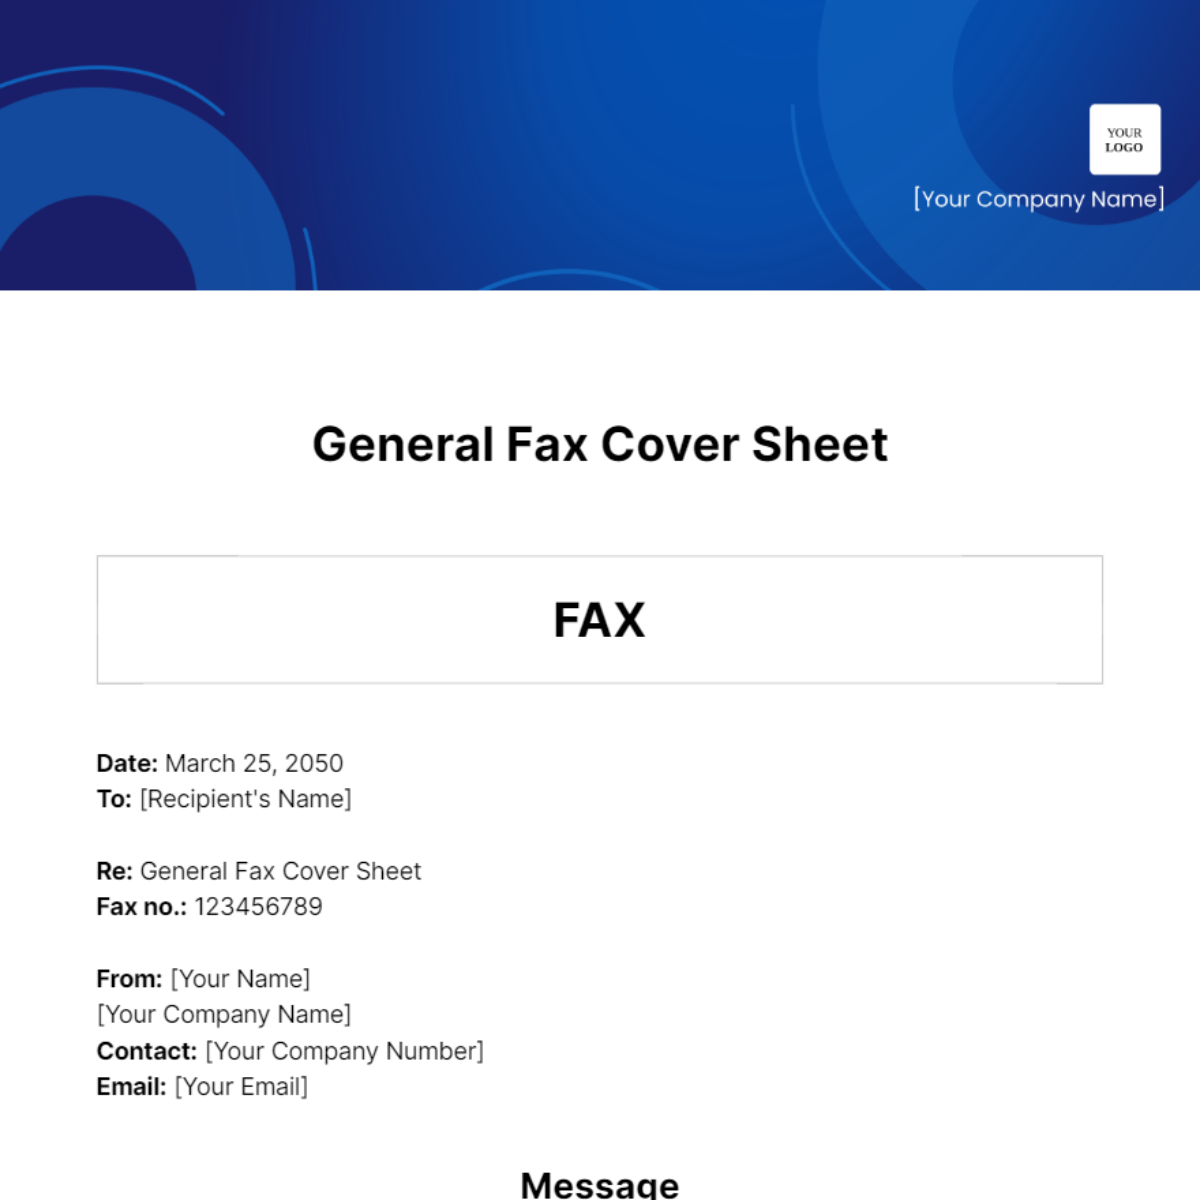 General Fax Cover Sheet